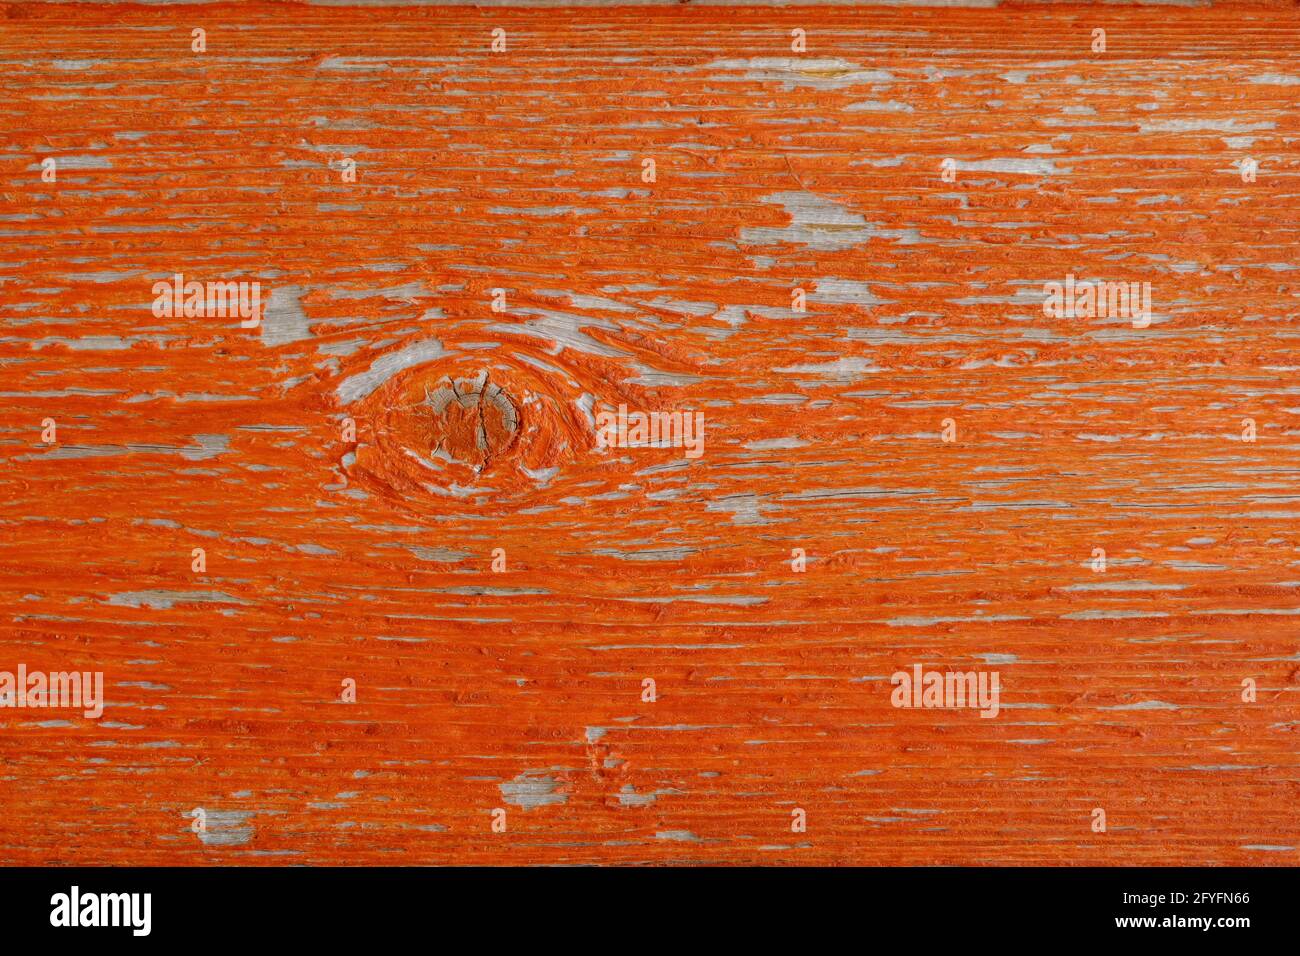 An old texture board with a knot, covered with peeling bright orange paint. Background textures. Stock Photo